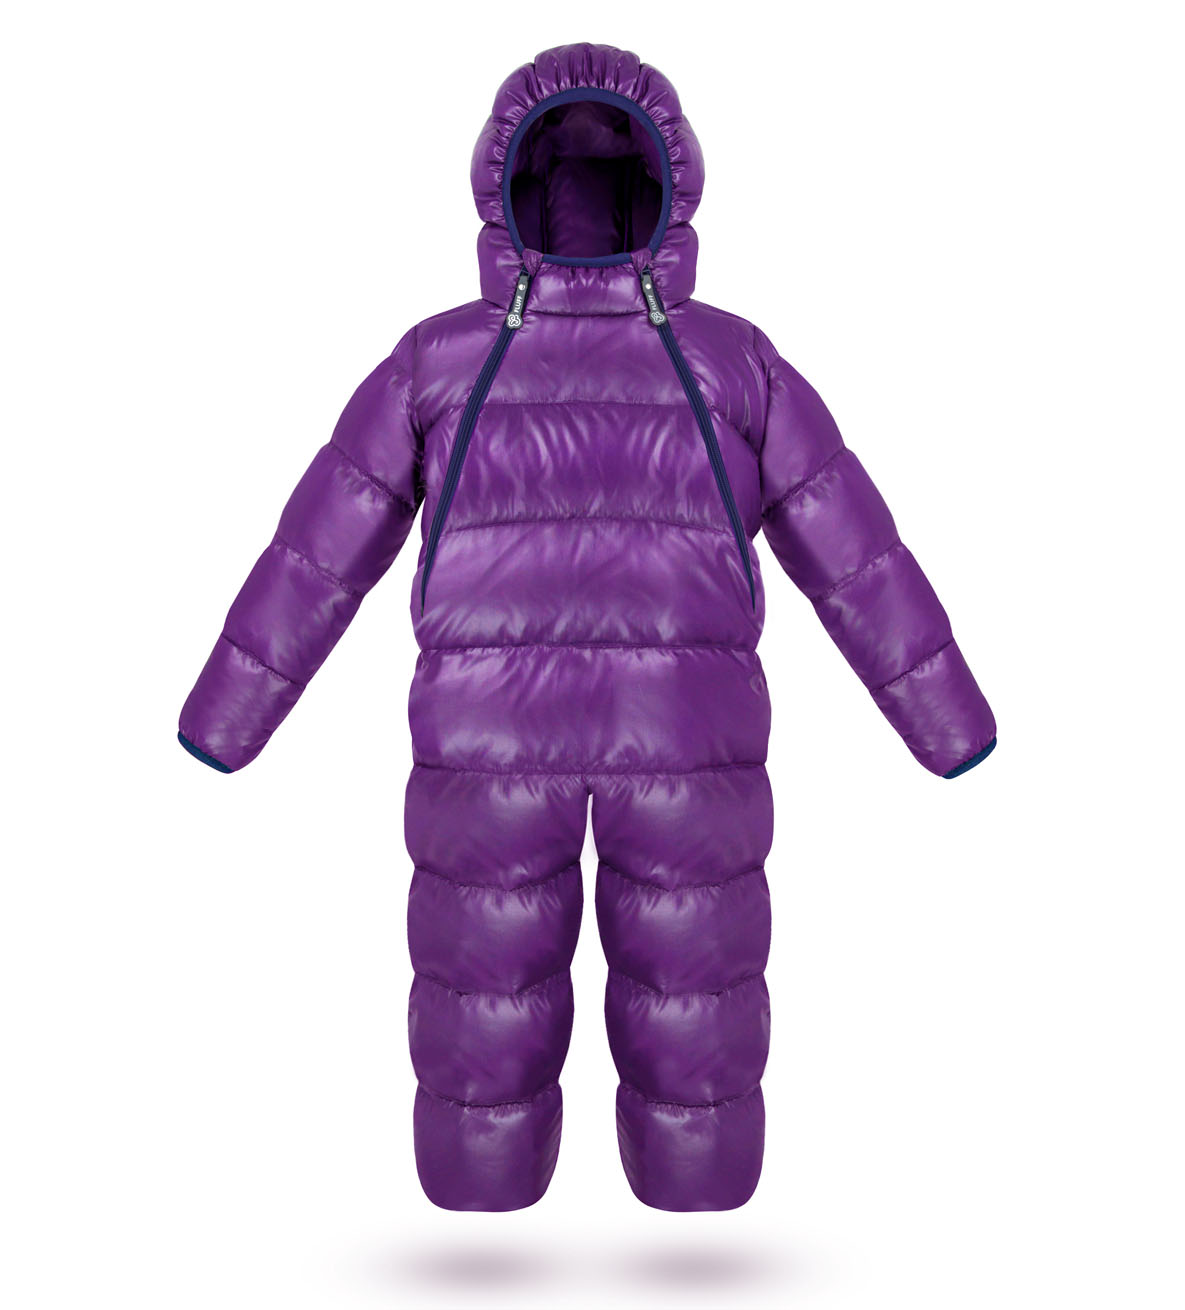 Kids' unisex snowsuit basic Purple, pink, with hood and zippers